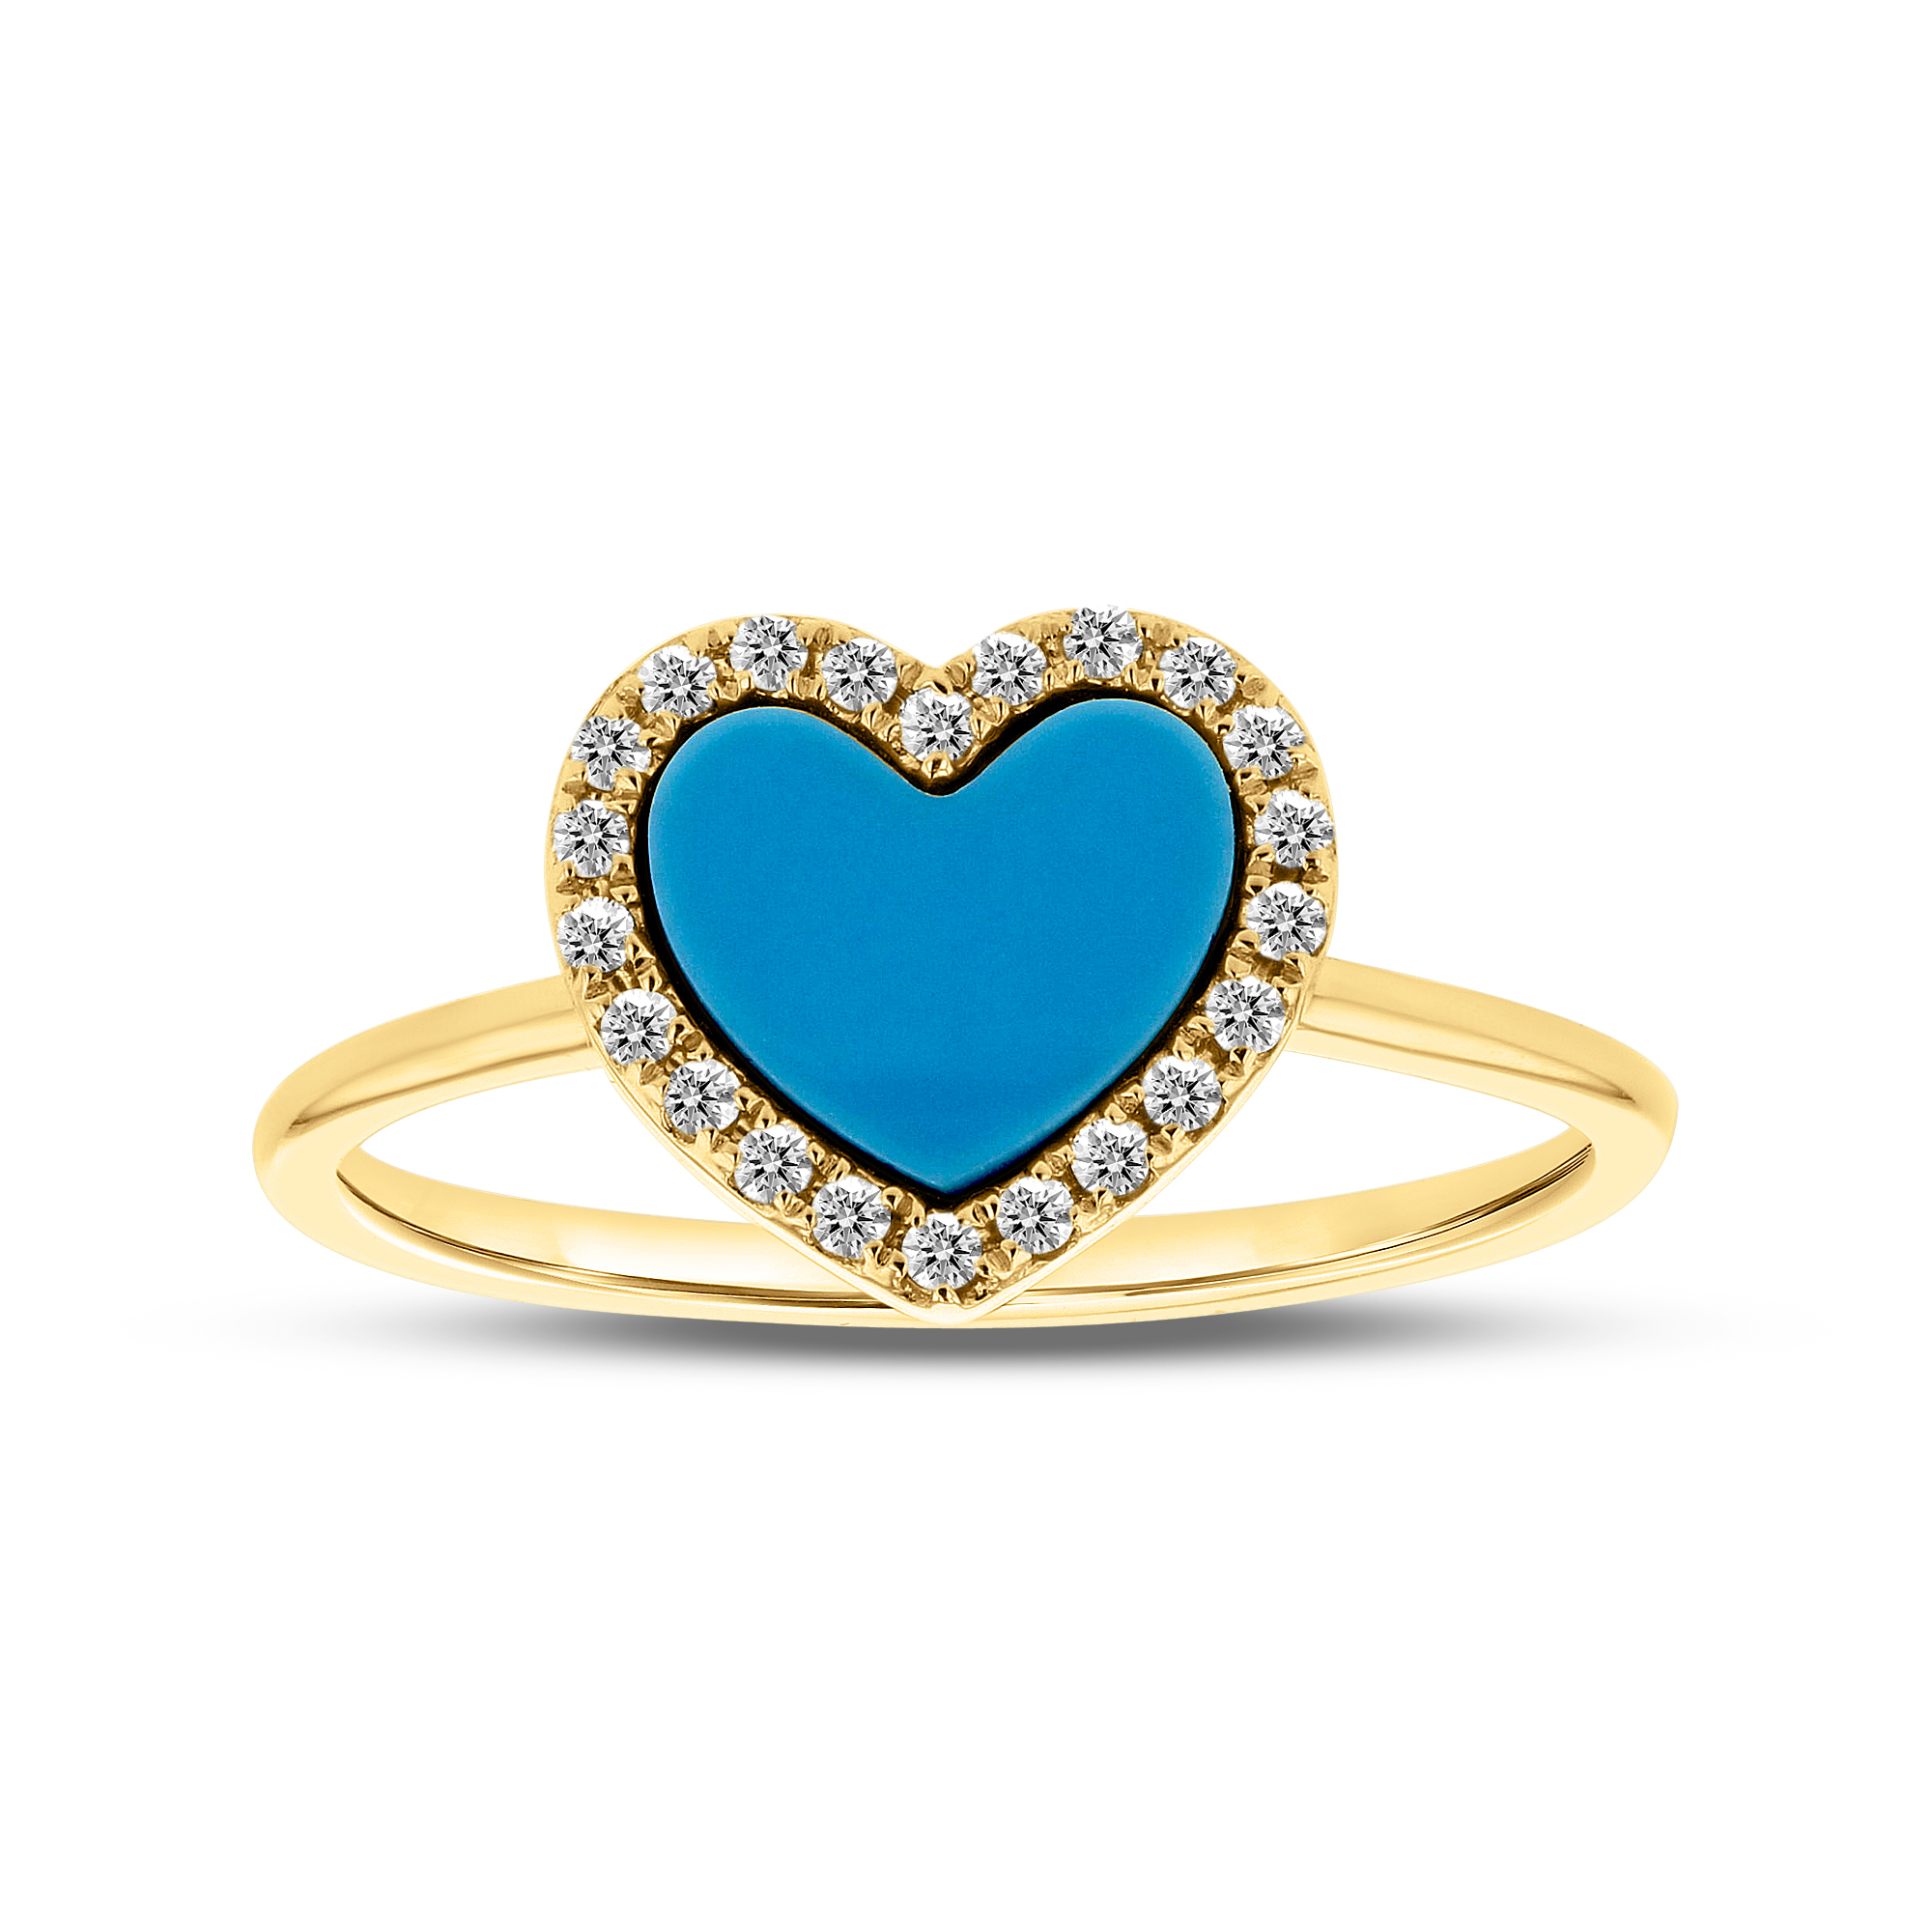 View 0.40ctw Diamond and Turquoise Heart Ring in 14k Yellow Gold